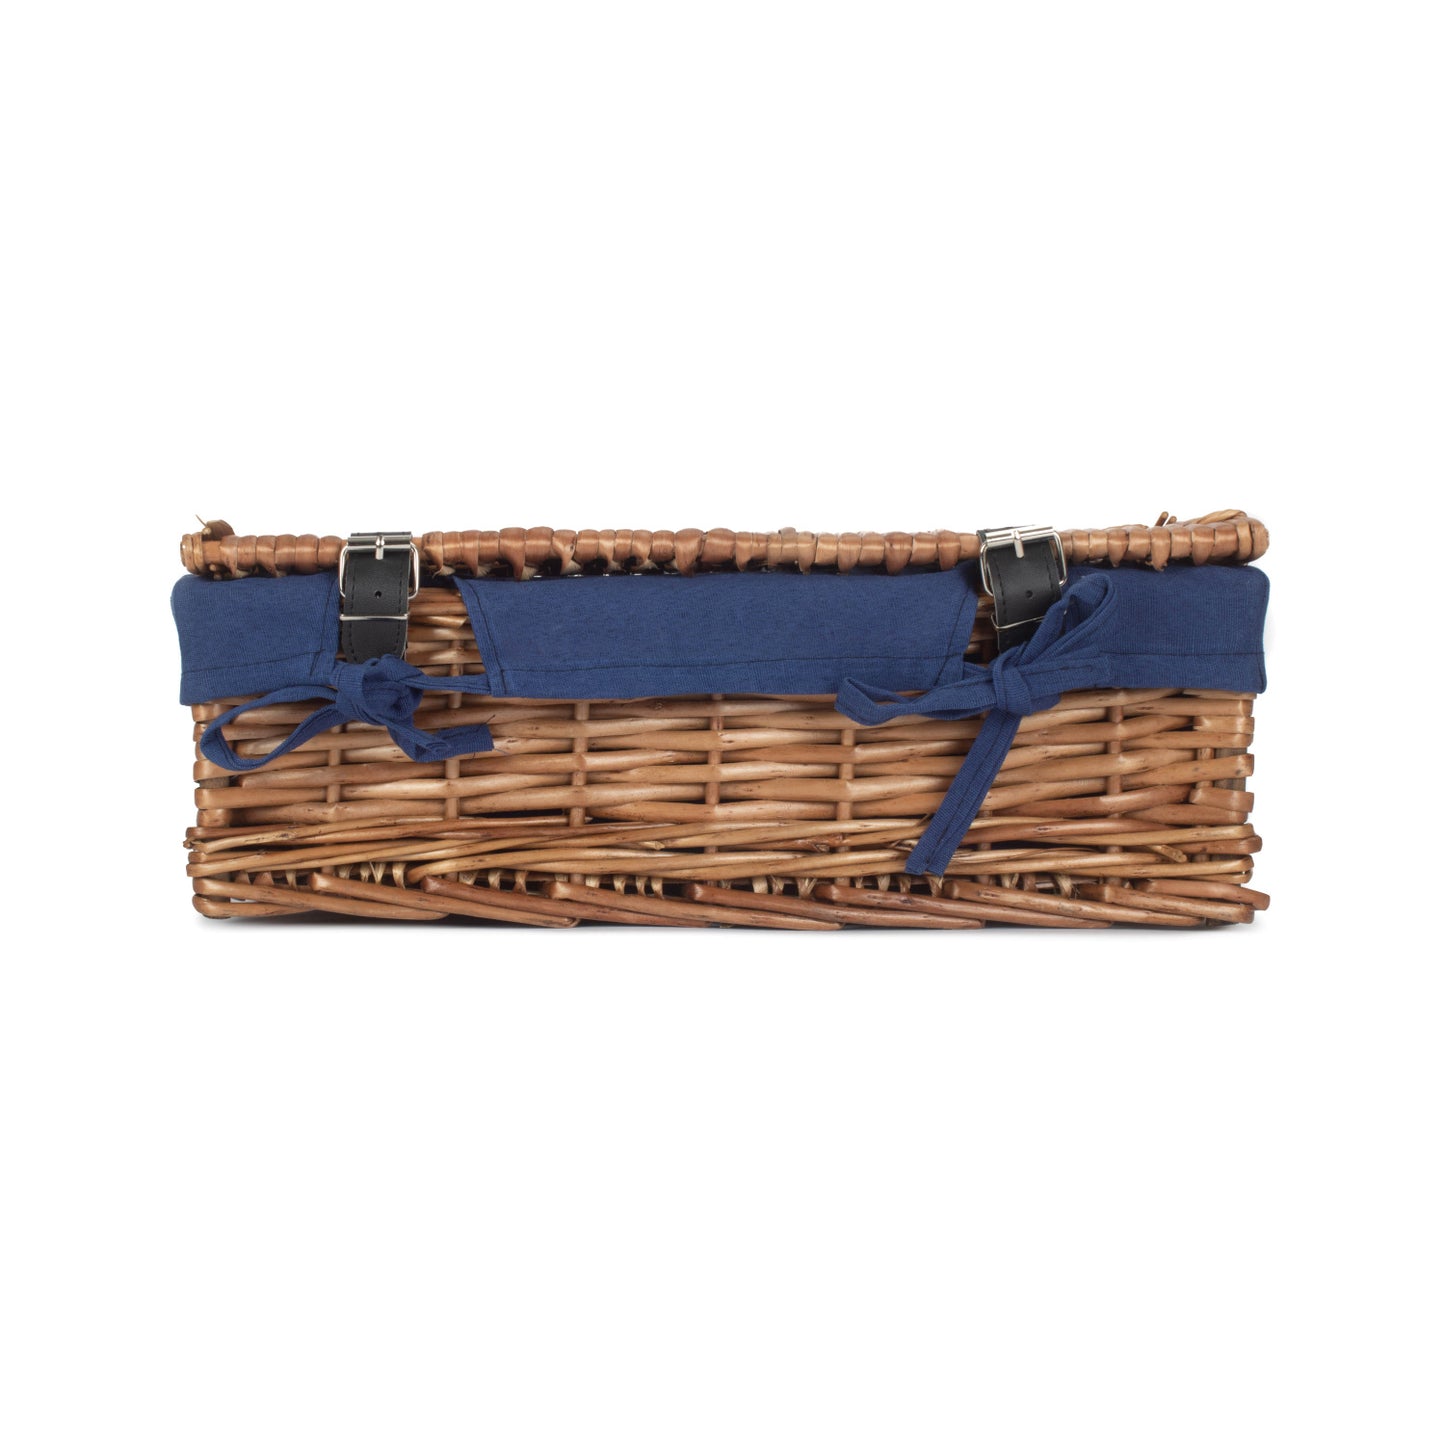 15 Inch Packaging Hamper With Navy Blue Lining